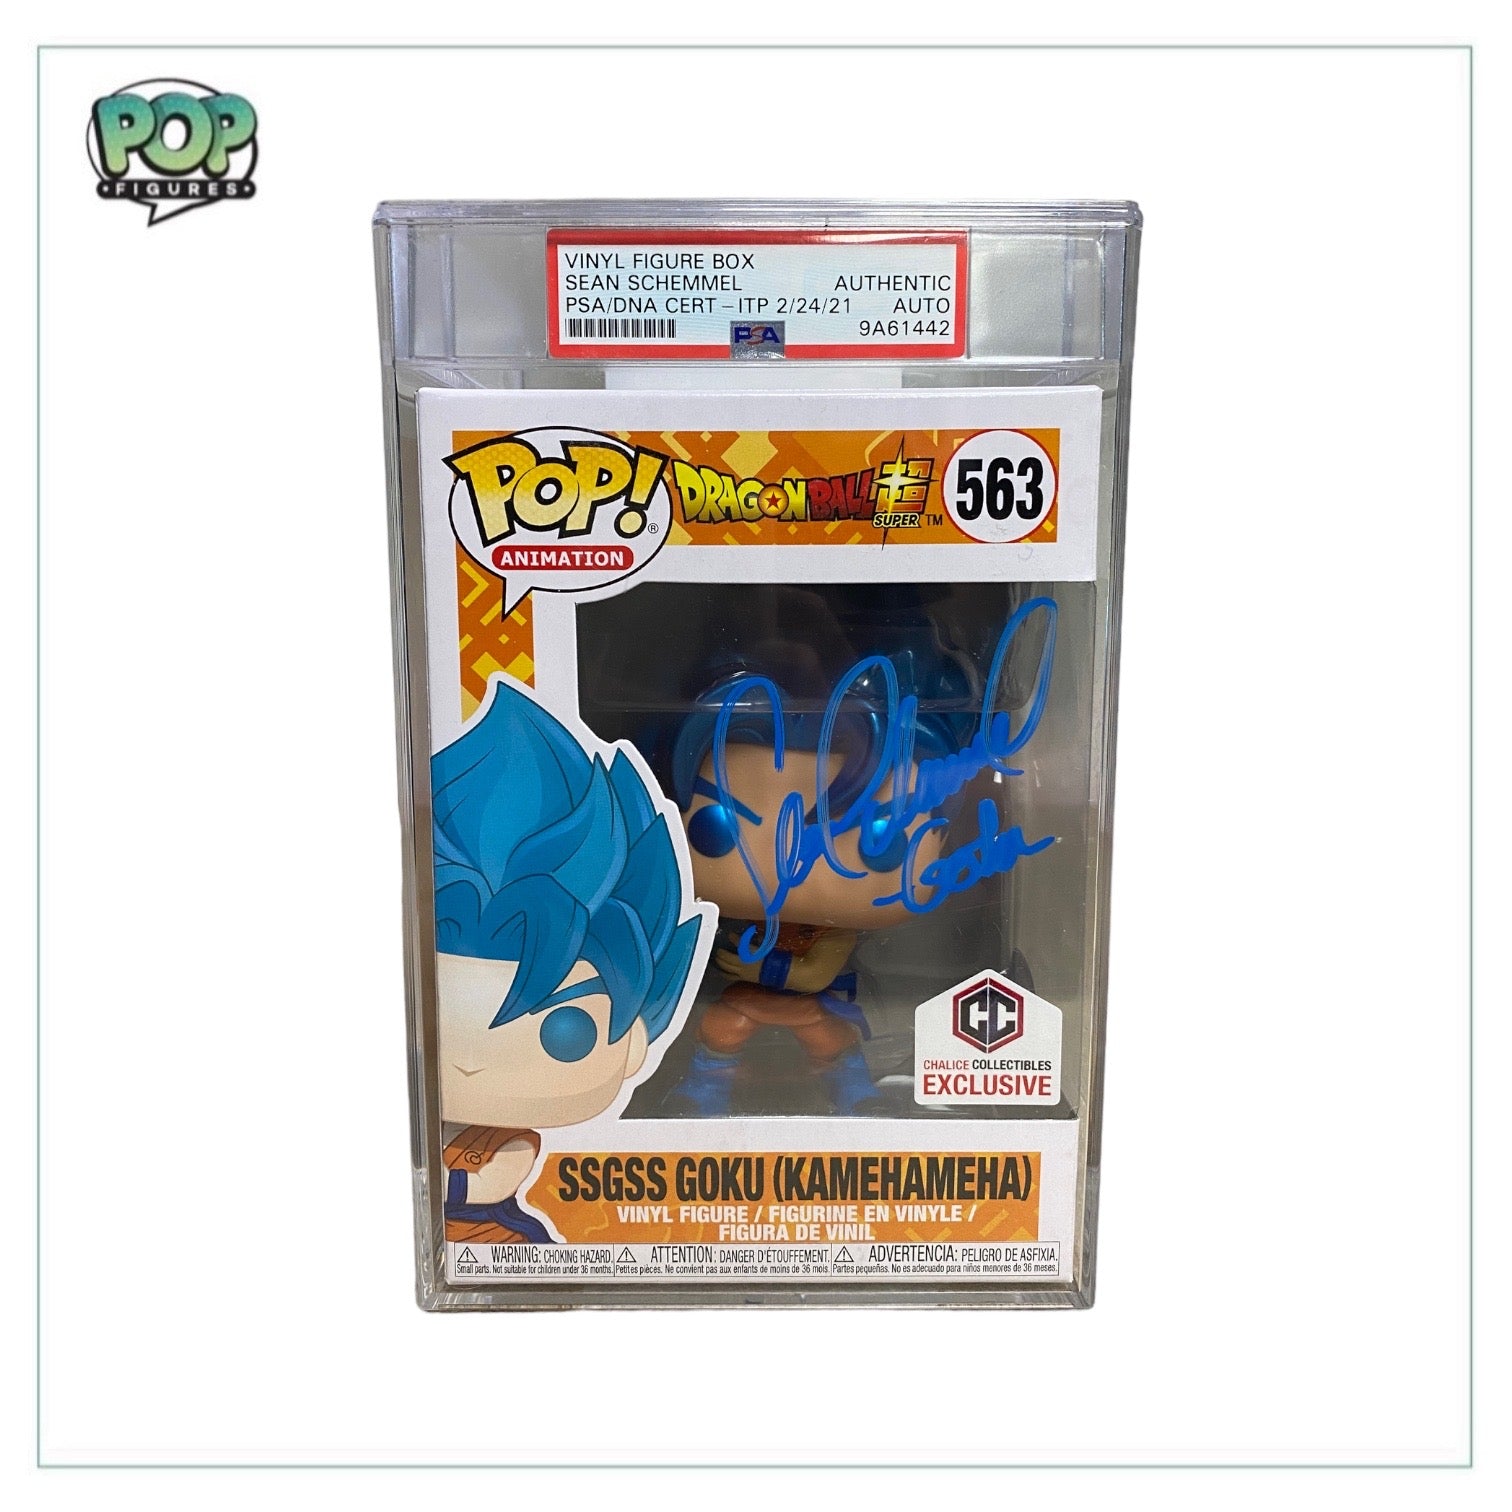 Sean Schemmel Signed SSGSS Goku (Kamehameha) #563 Funko Pop! - Dragon Ball Super - Chalice Collectibles Exclusive - PSA In-the-Presence Authentication